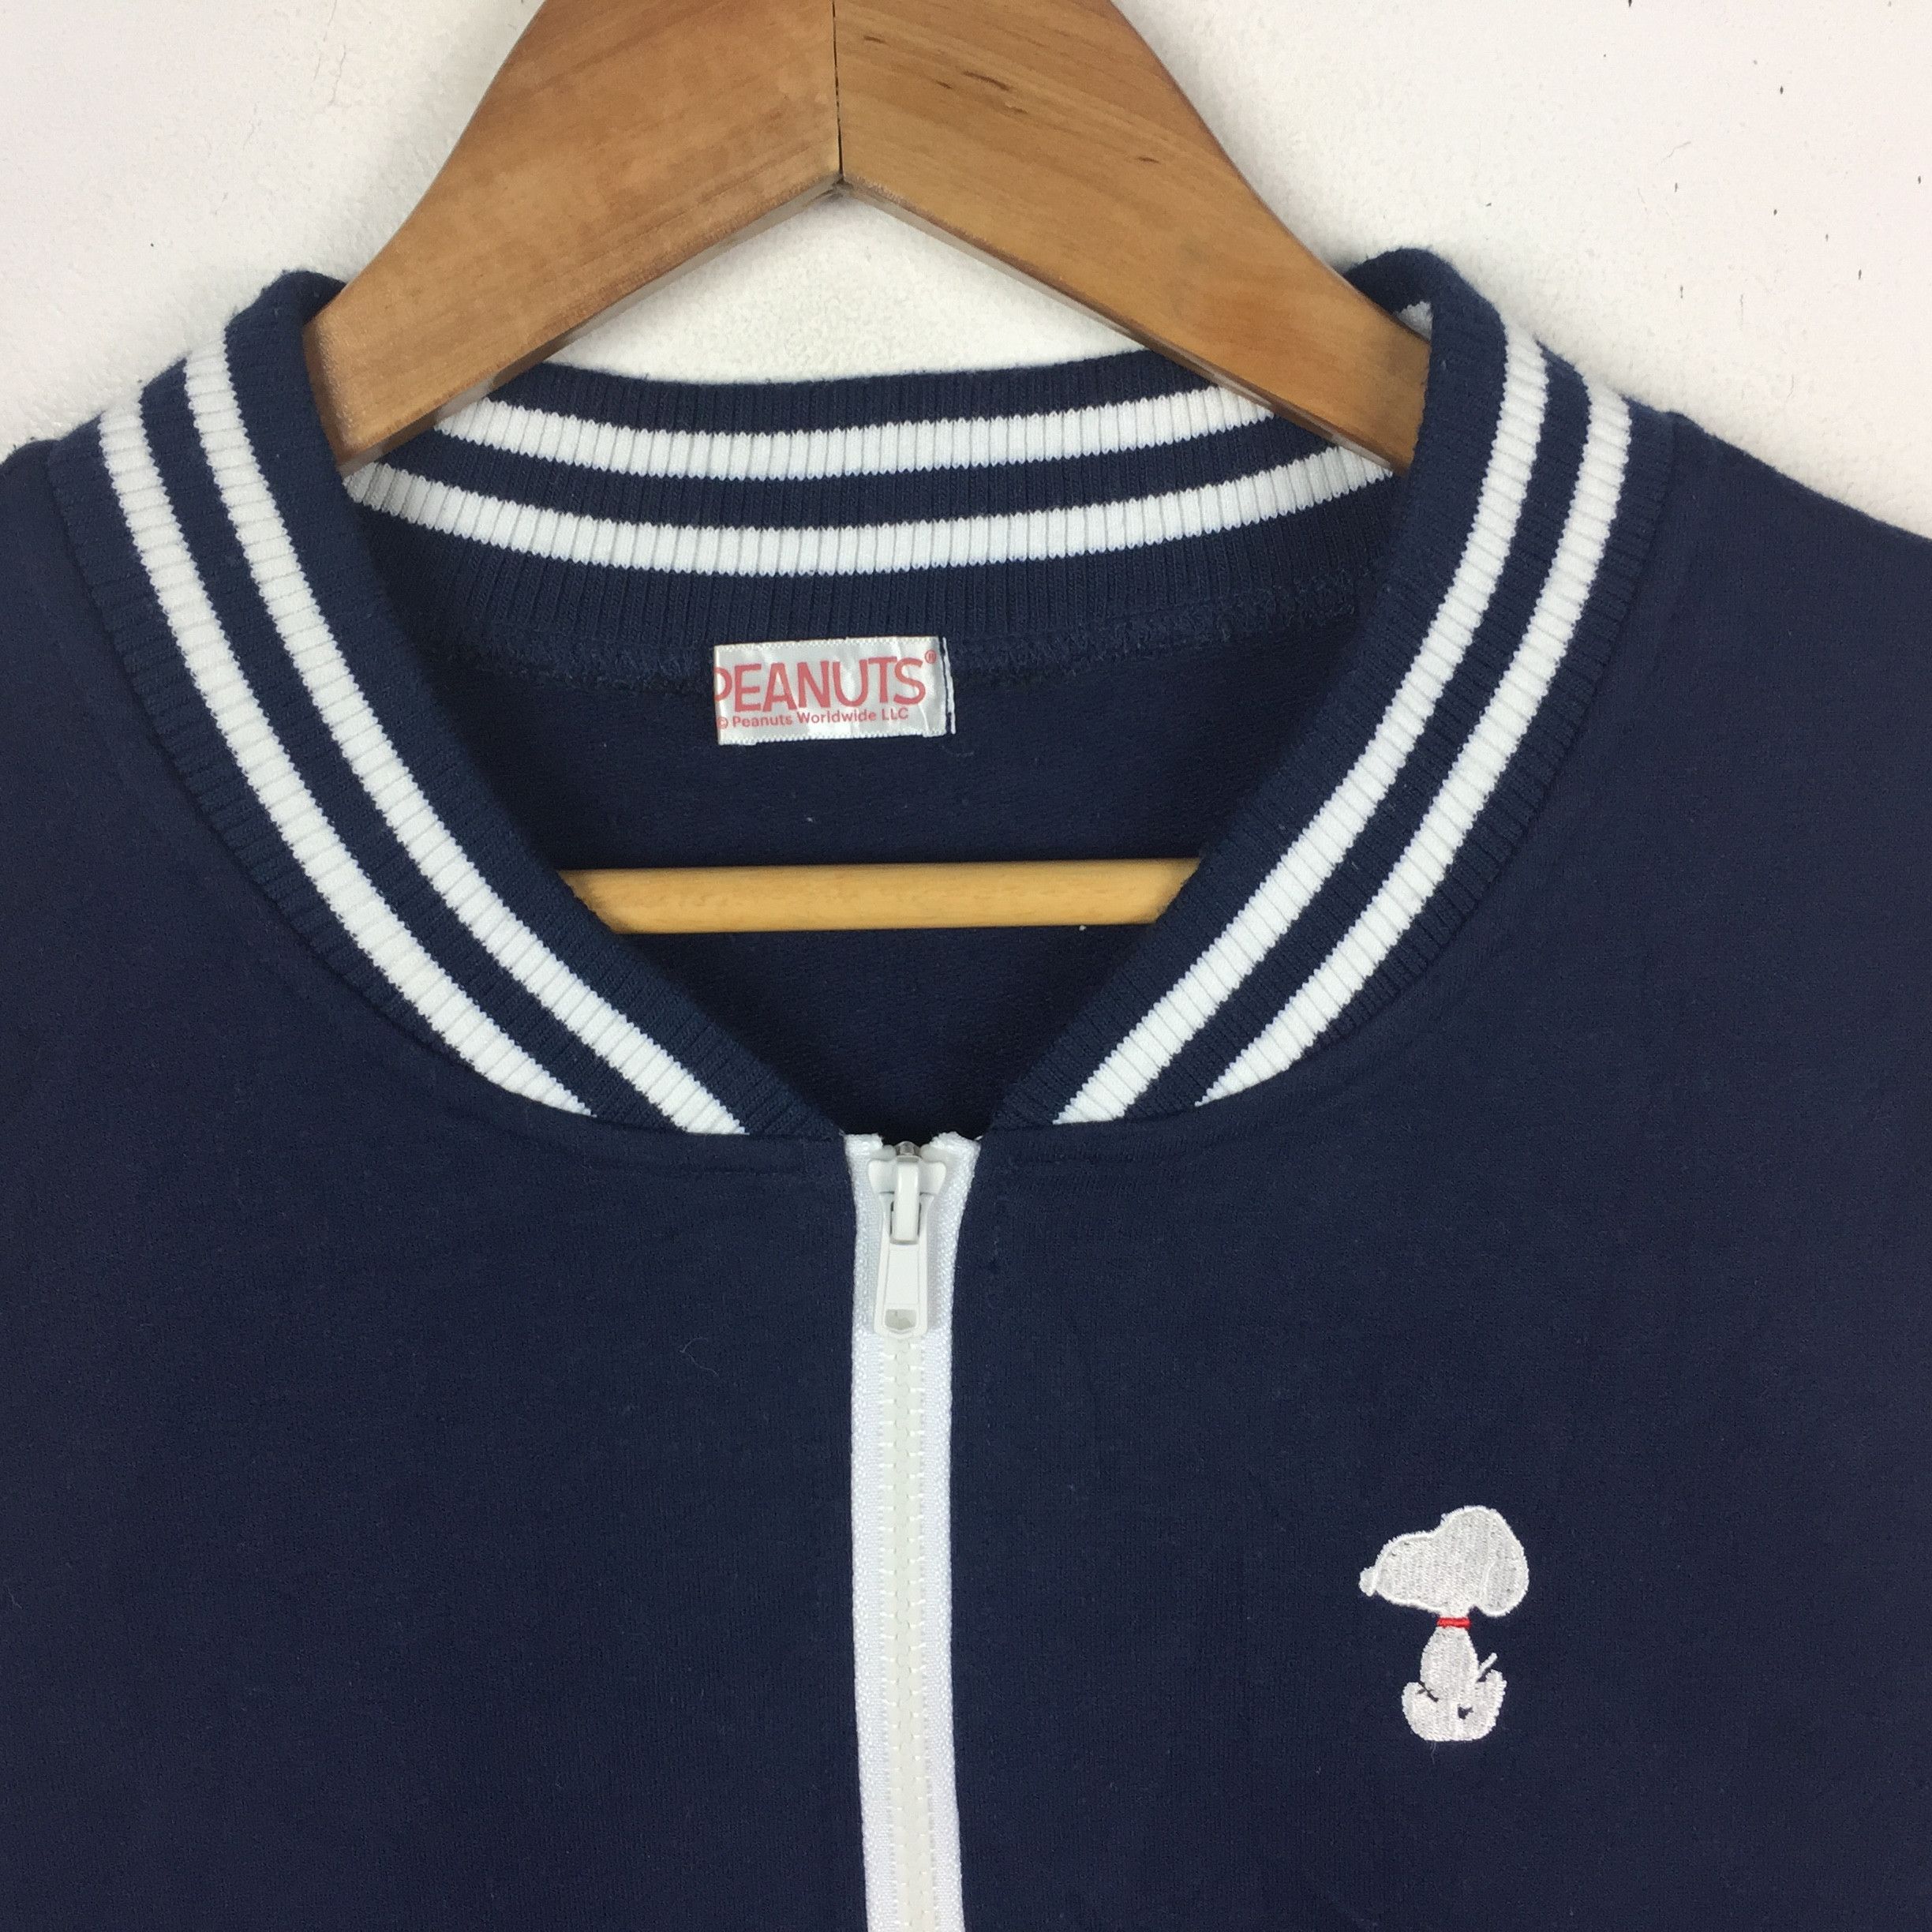 Uniqlo Vintage Peanuts Snoopy Rookie Of The Year Varsity Jacket Size US S / EU 44-46 / 1 - 2 Preview